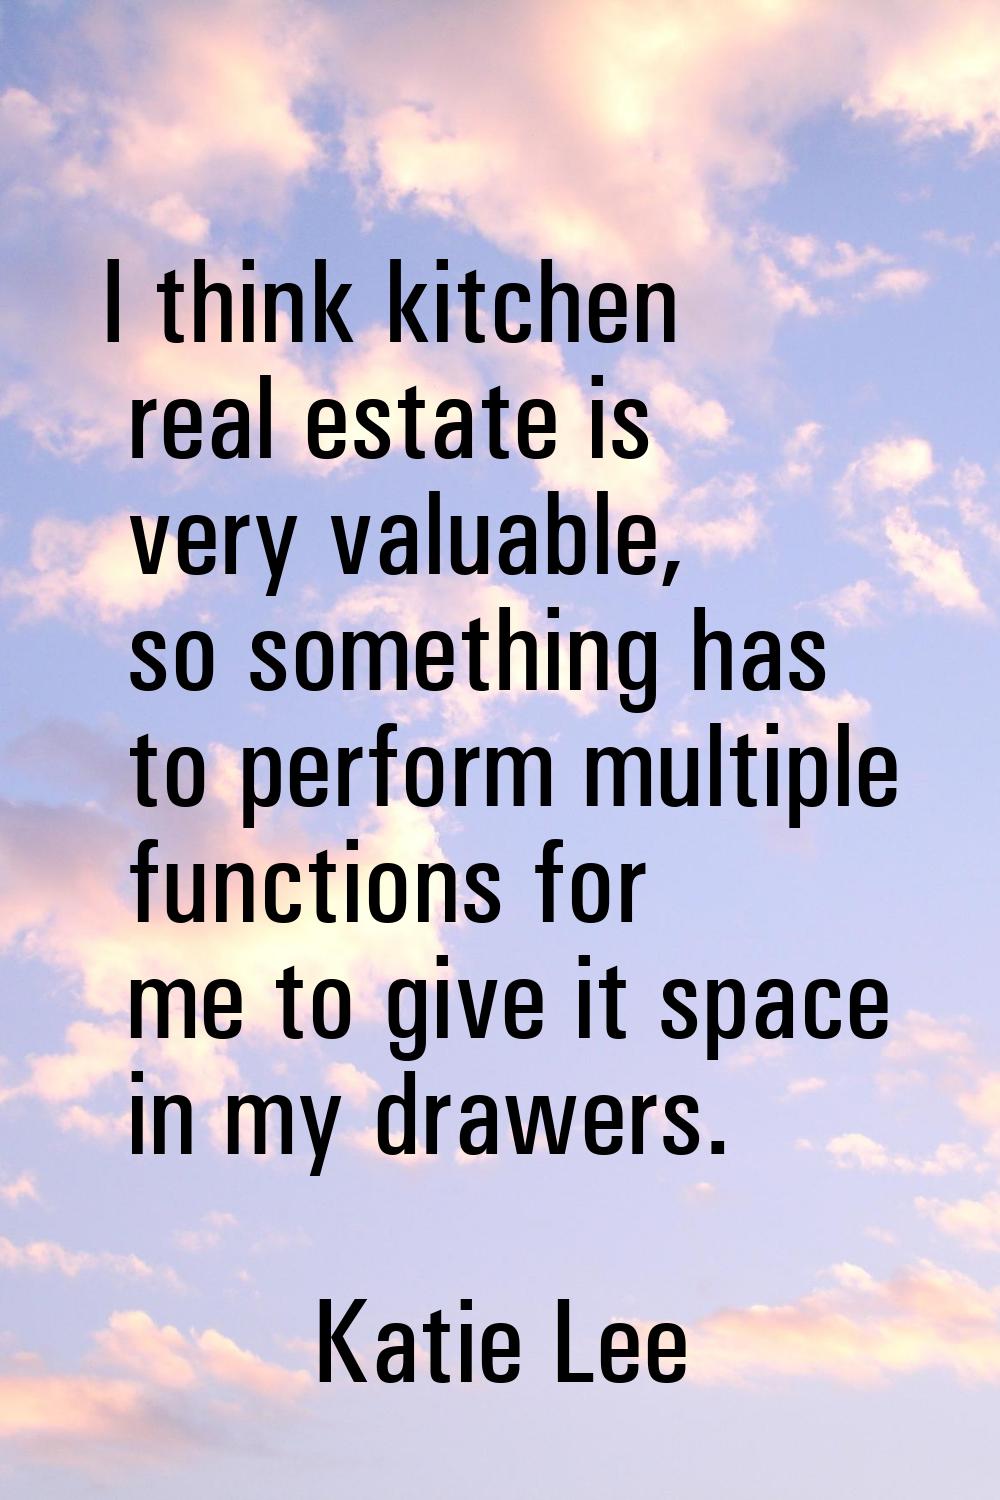 I think kitchen real estate is very valuable, so something has to perform multiple functions for me